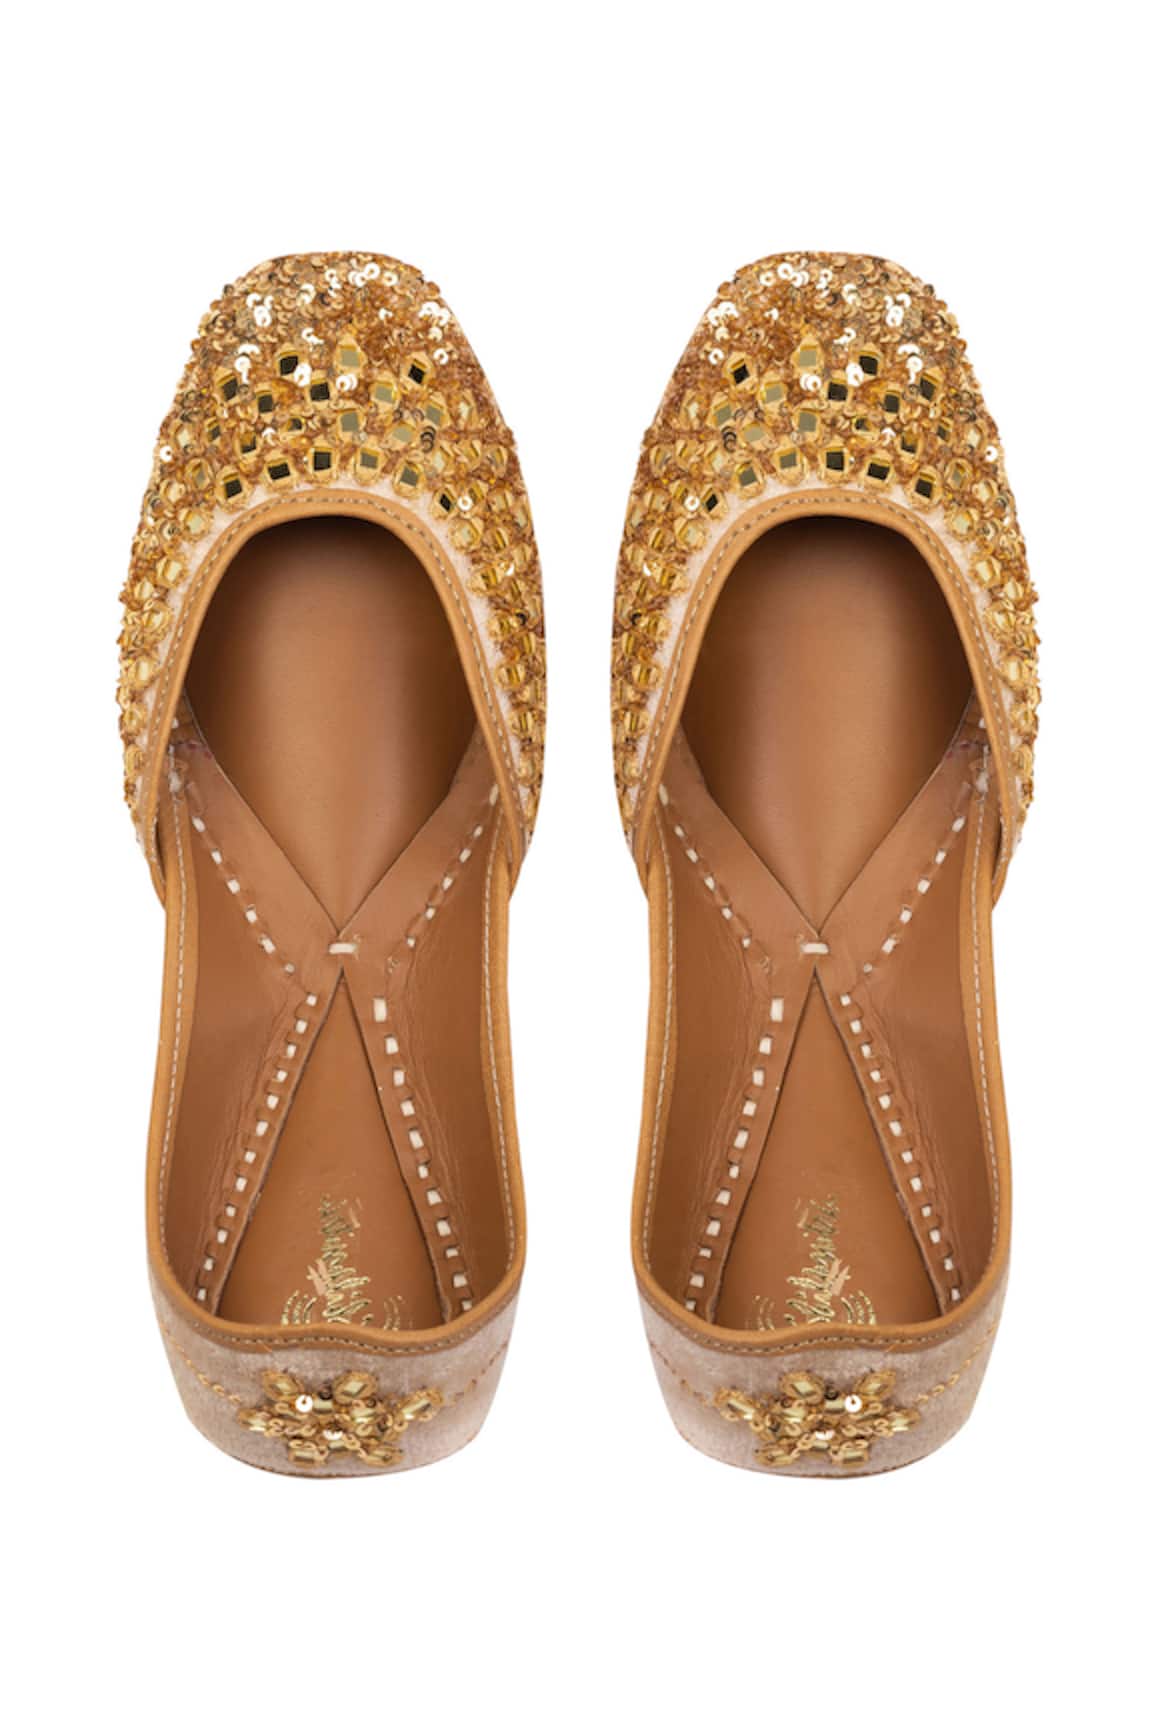 Shilpsutra mirro-sequin-embroidered-juttis